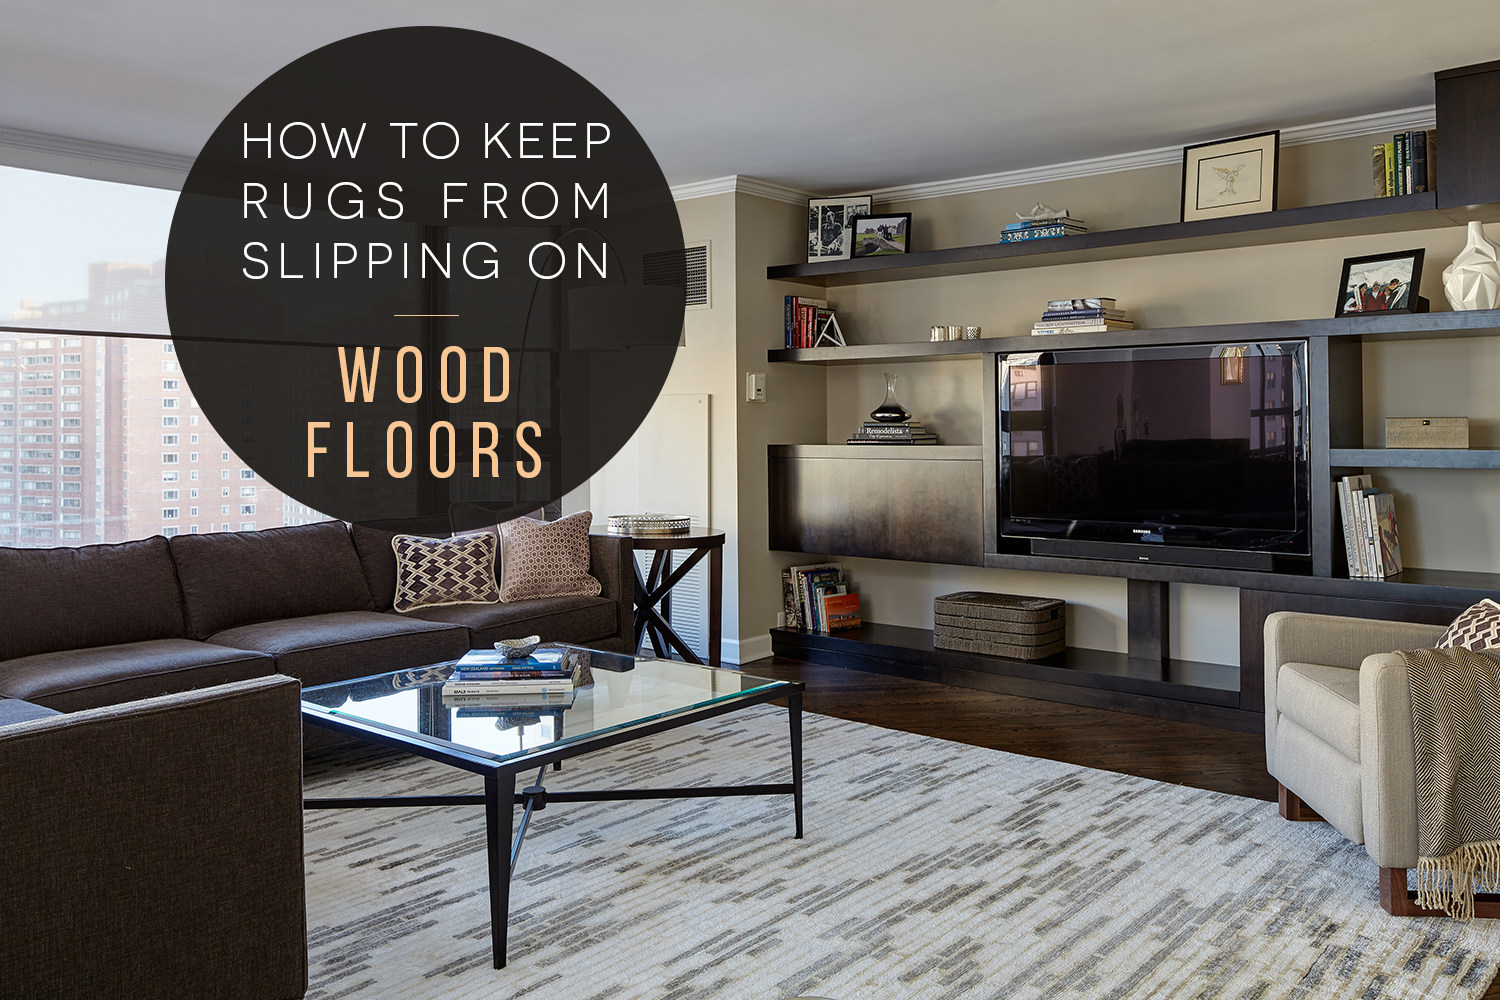 How to Keep Rugs From Slipping on Wood Floors